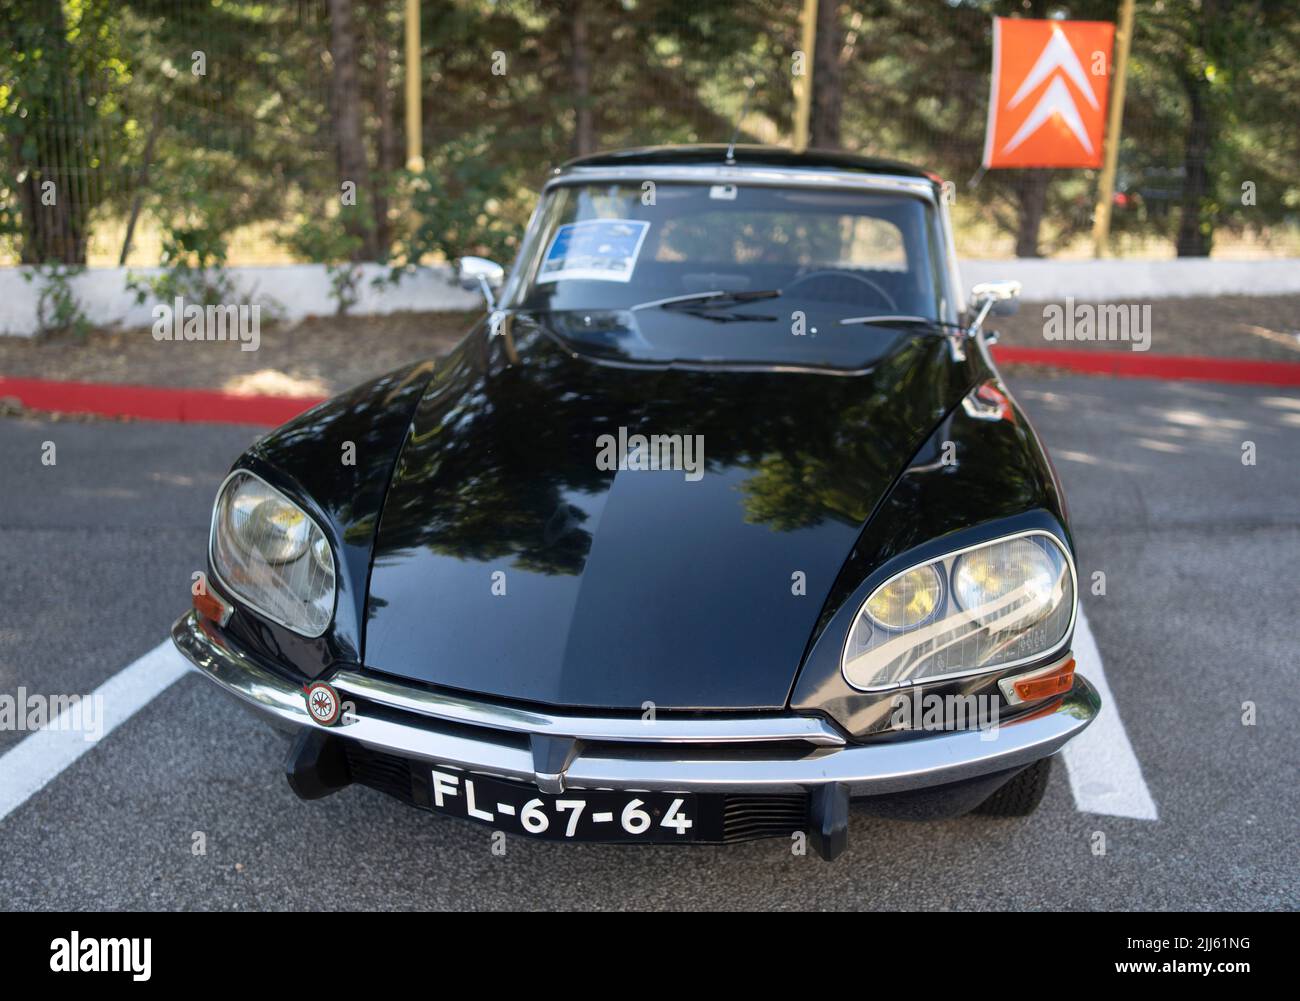 Citroen DS classic car from french manufacturer Citroën Stock Photo